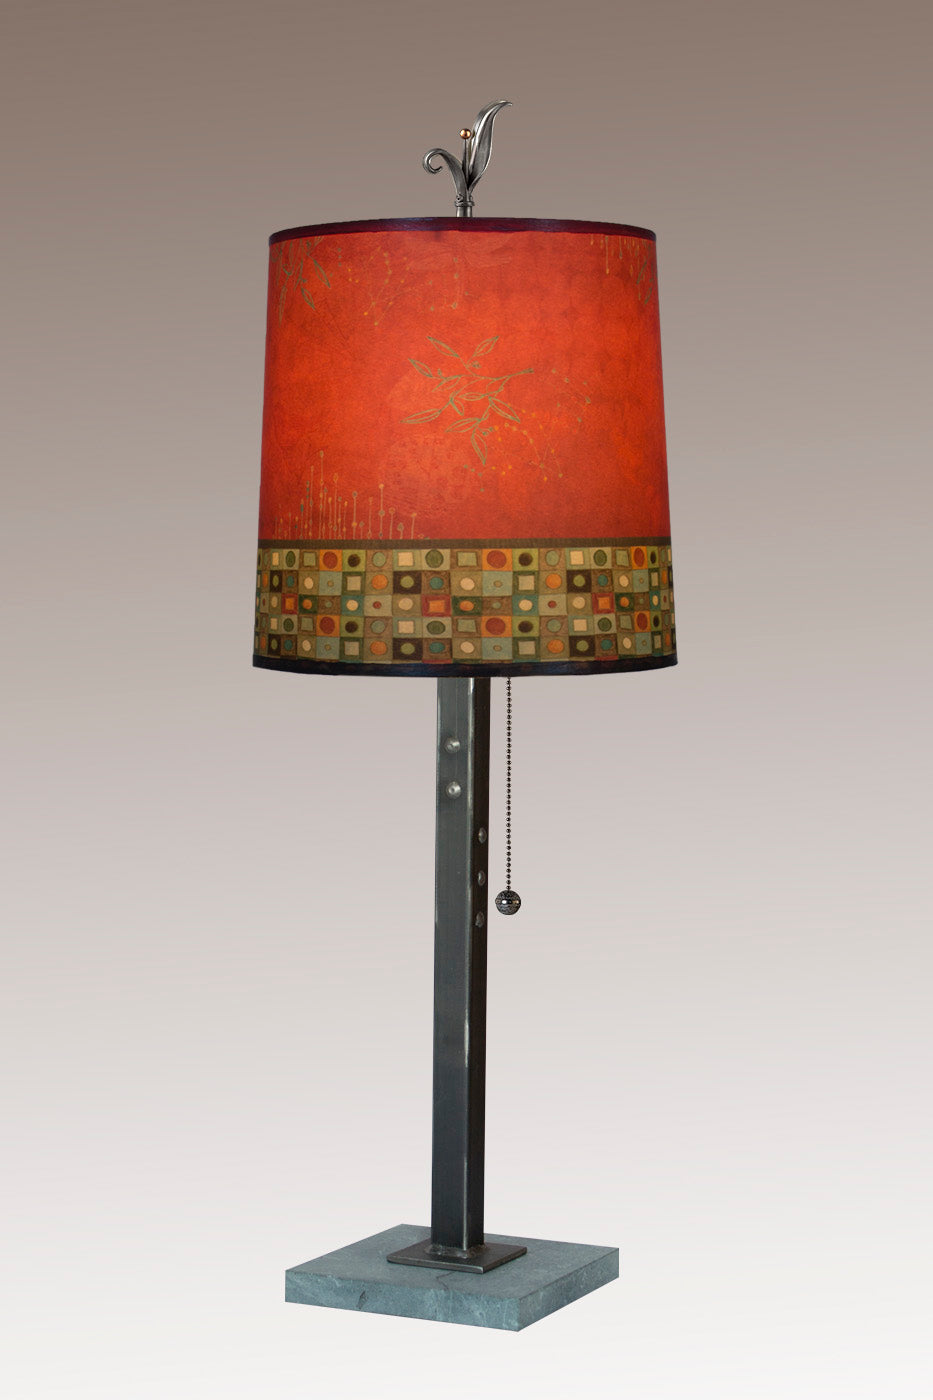 Janna Ugone &amp; Co Table Lamps Steel Table Lamp with Medium Drum Shade in Red Mosaic